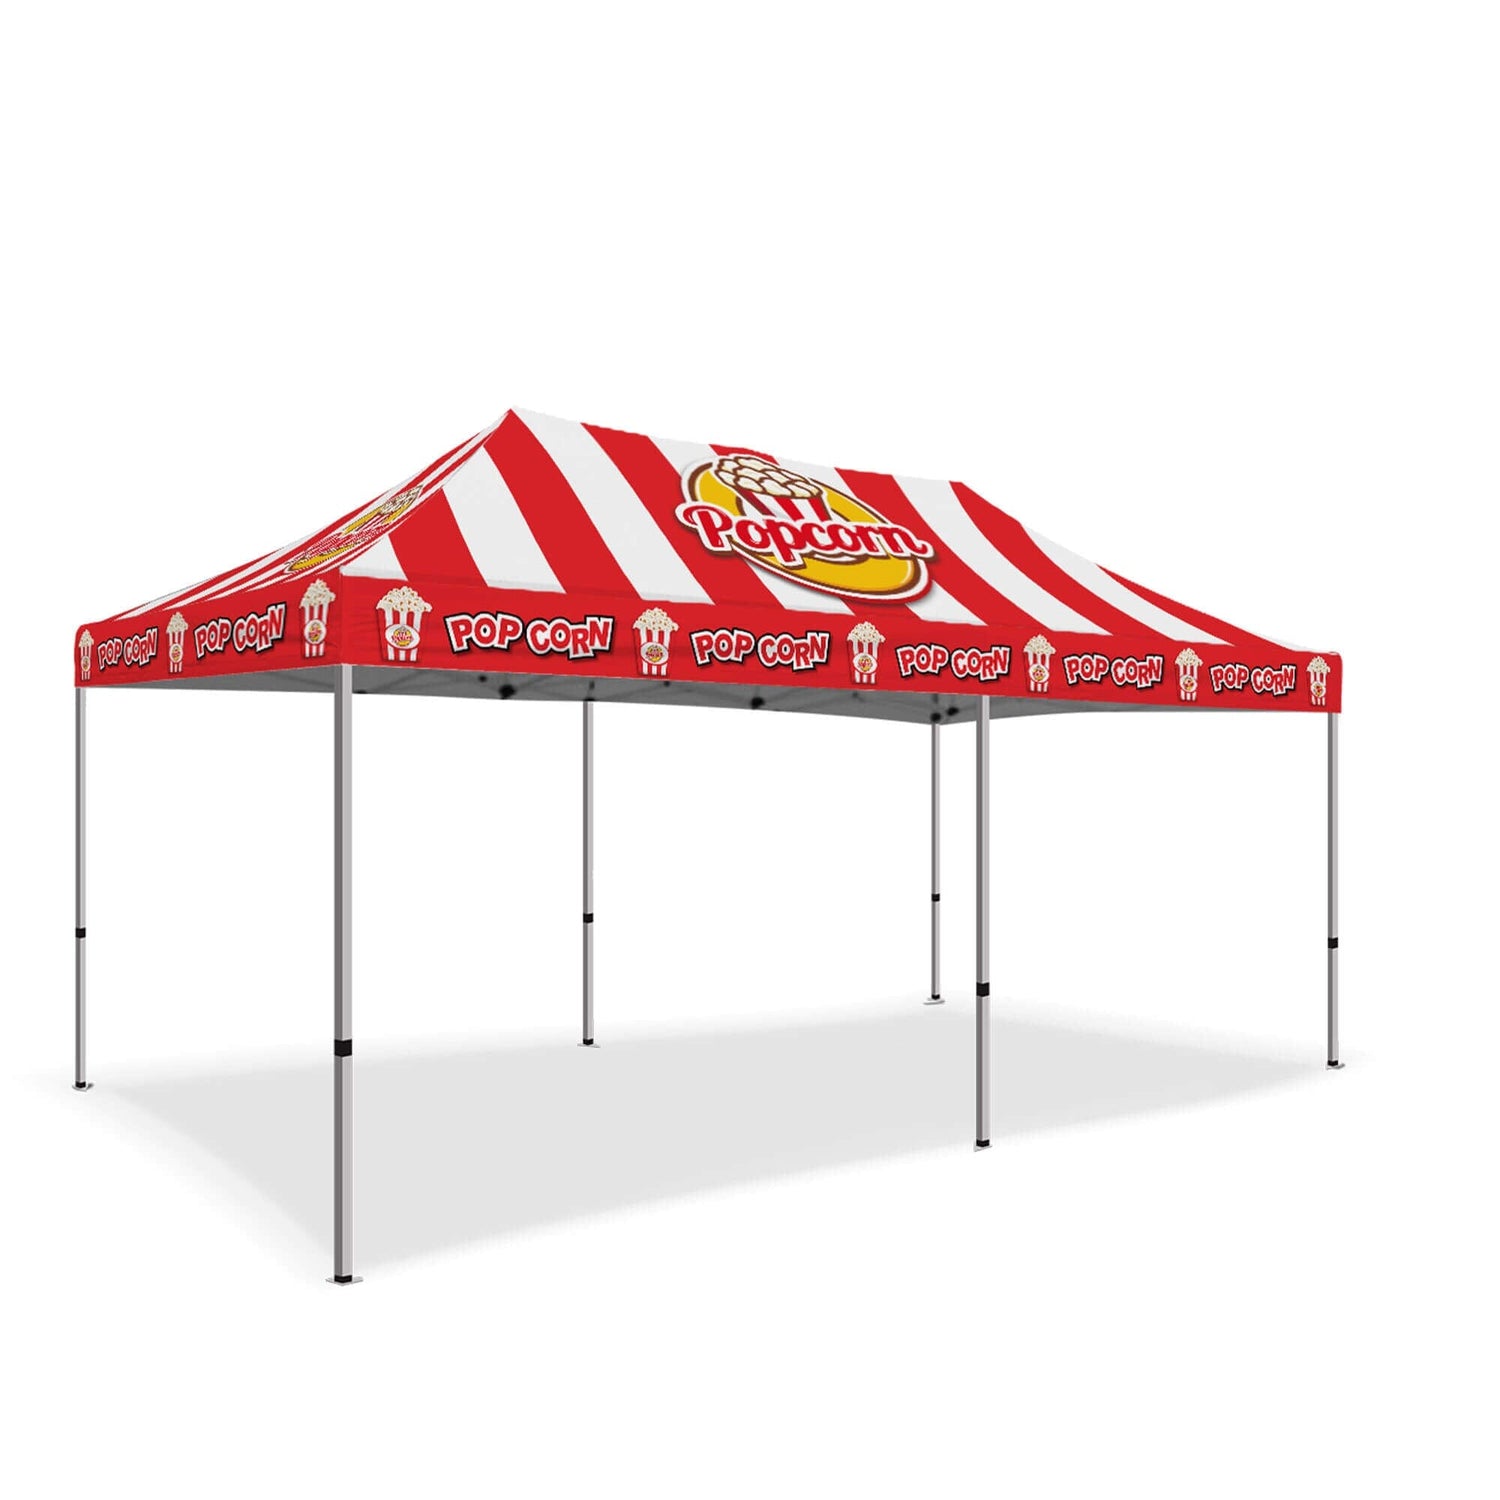 Custom Canopy Tent Everyday Basic Package 10M1020601